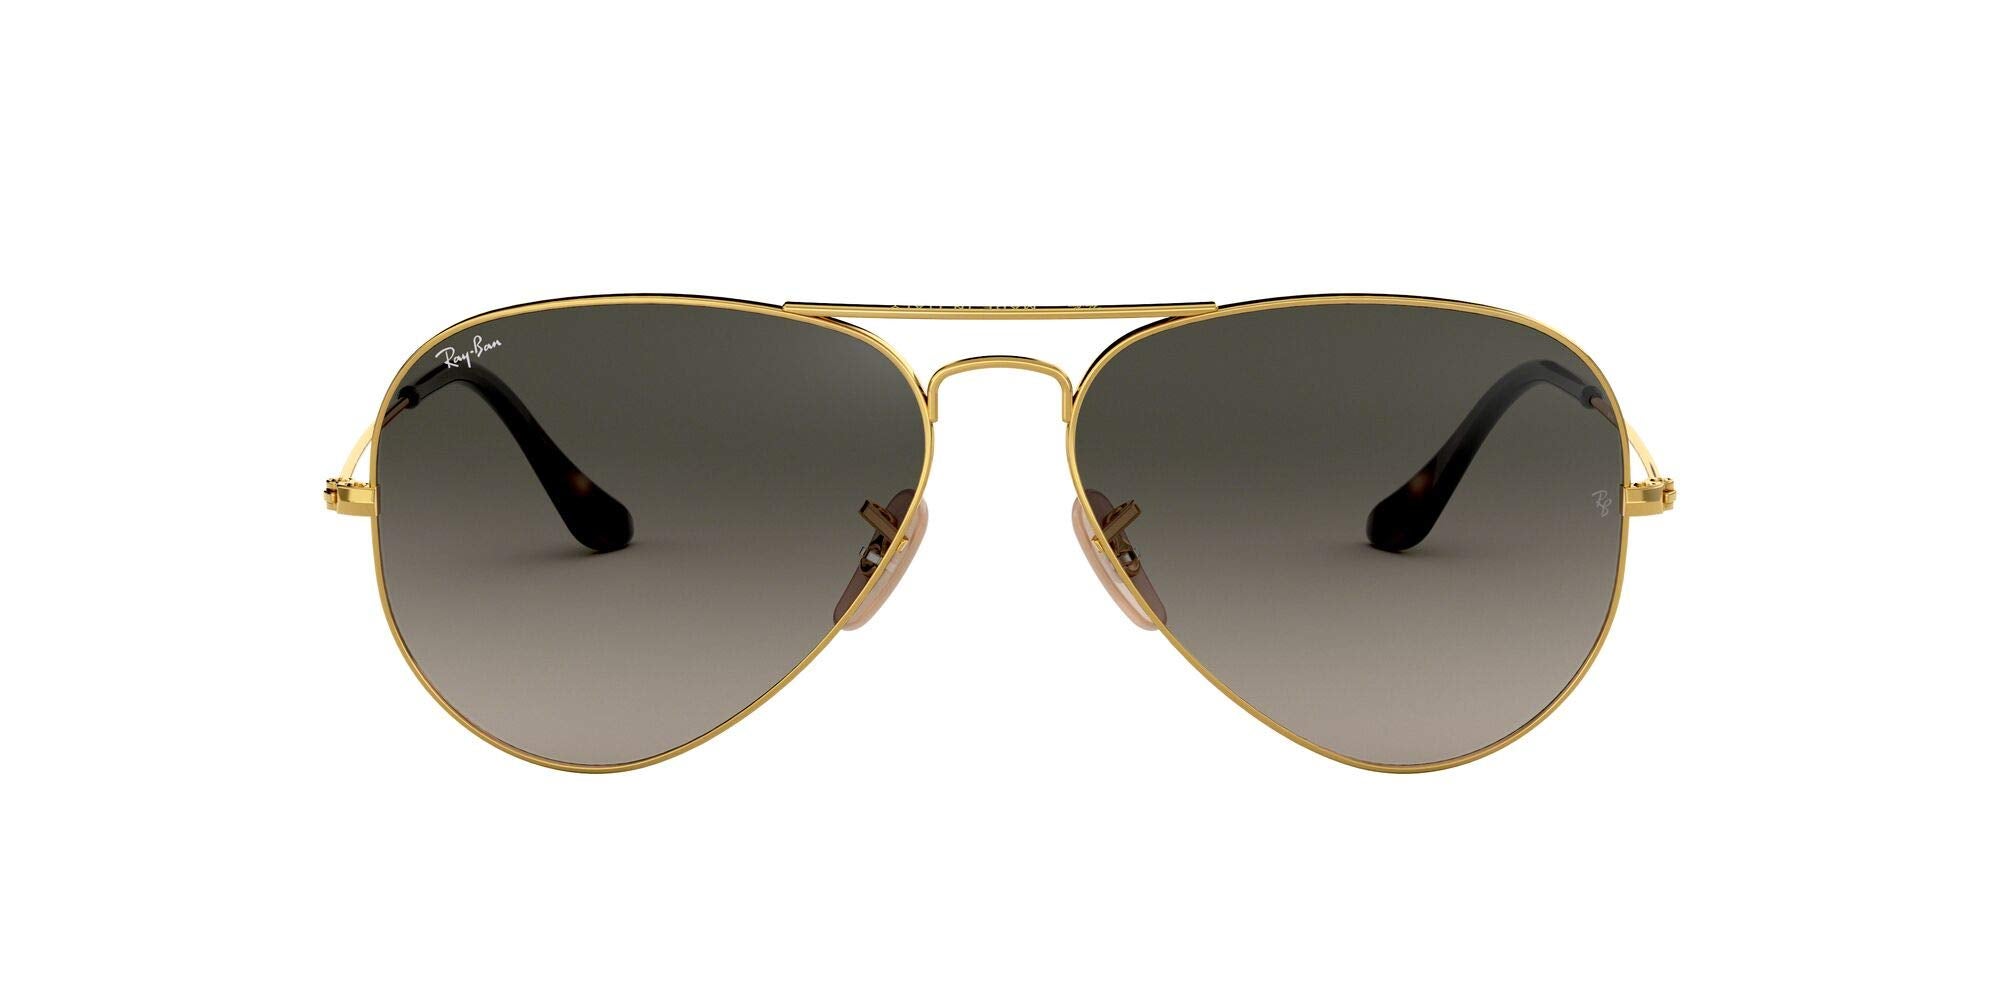 Induceren naast Bovenstaande Ray-Ban Sunglasses Up To 30% Off Amazon Prime Day 2022